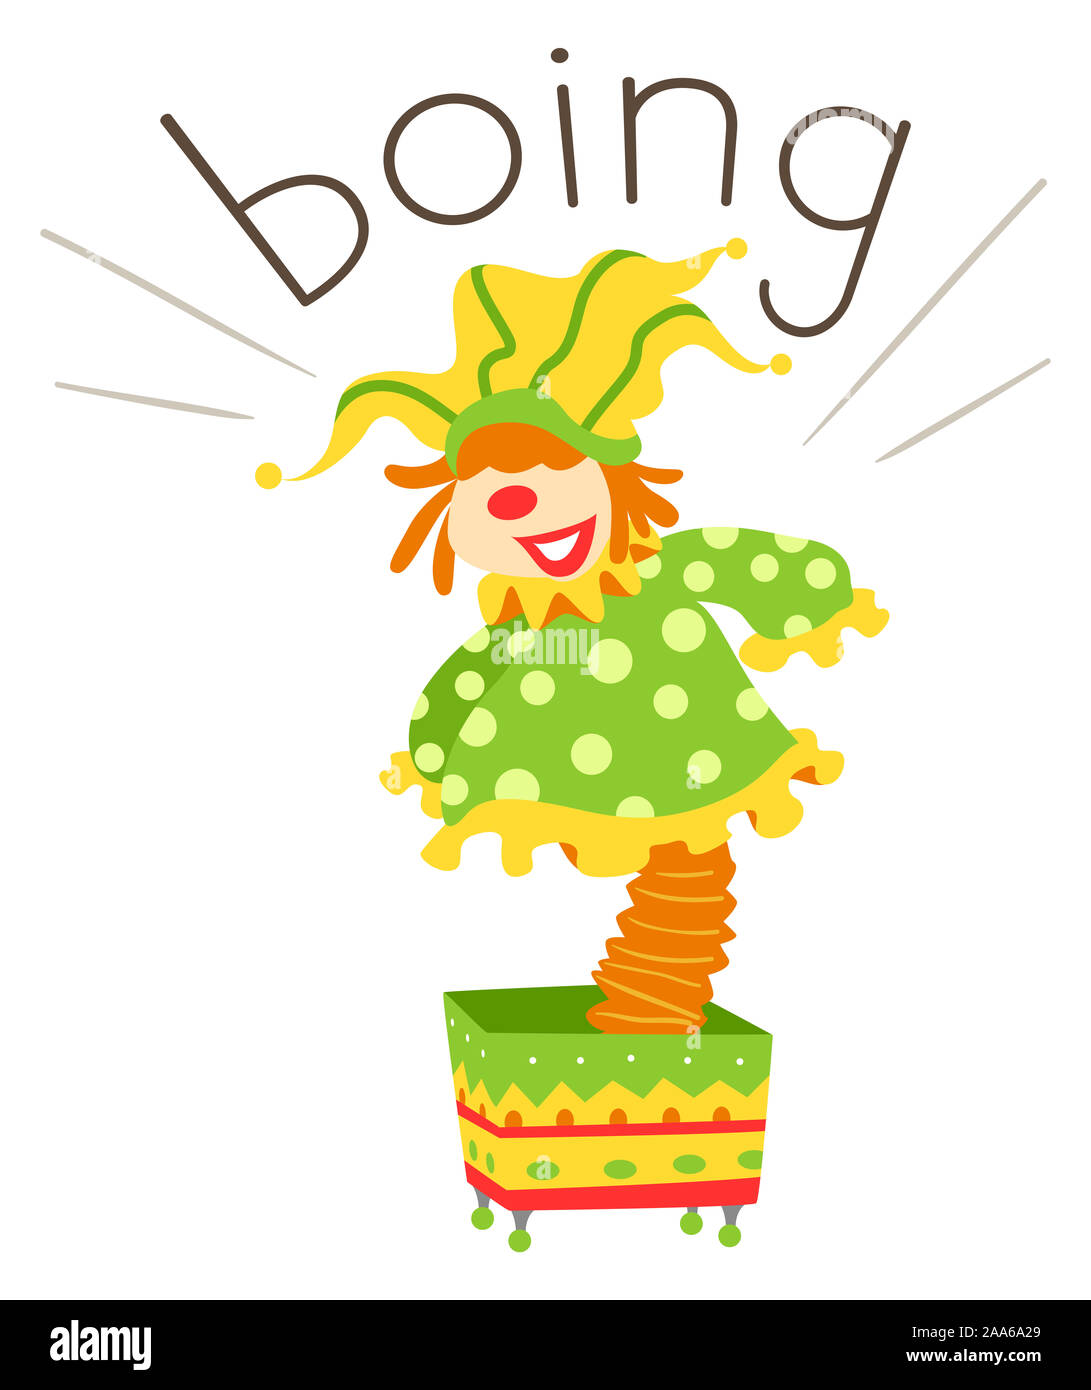 Illustration of Boing Sound and a Toy Clown from Inside a Box. Learning Onomatopoeia Stock Photo